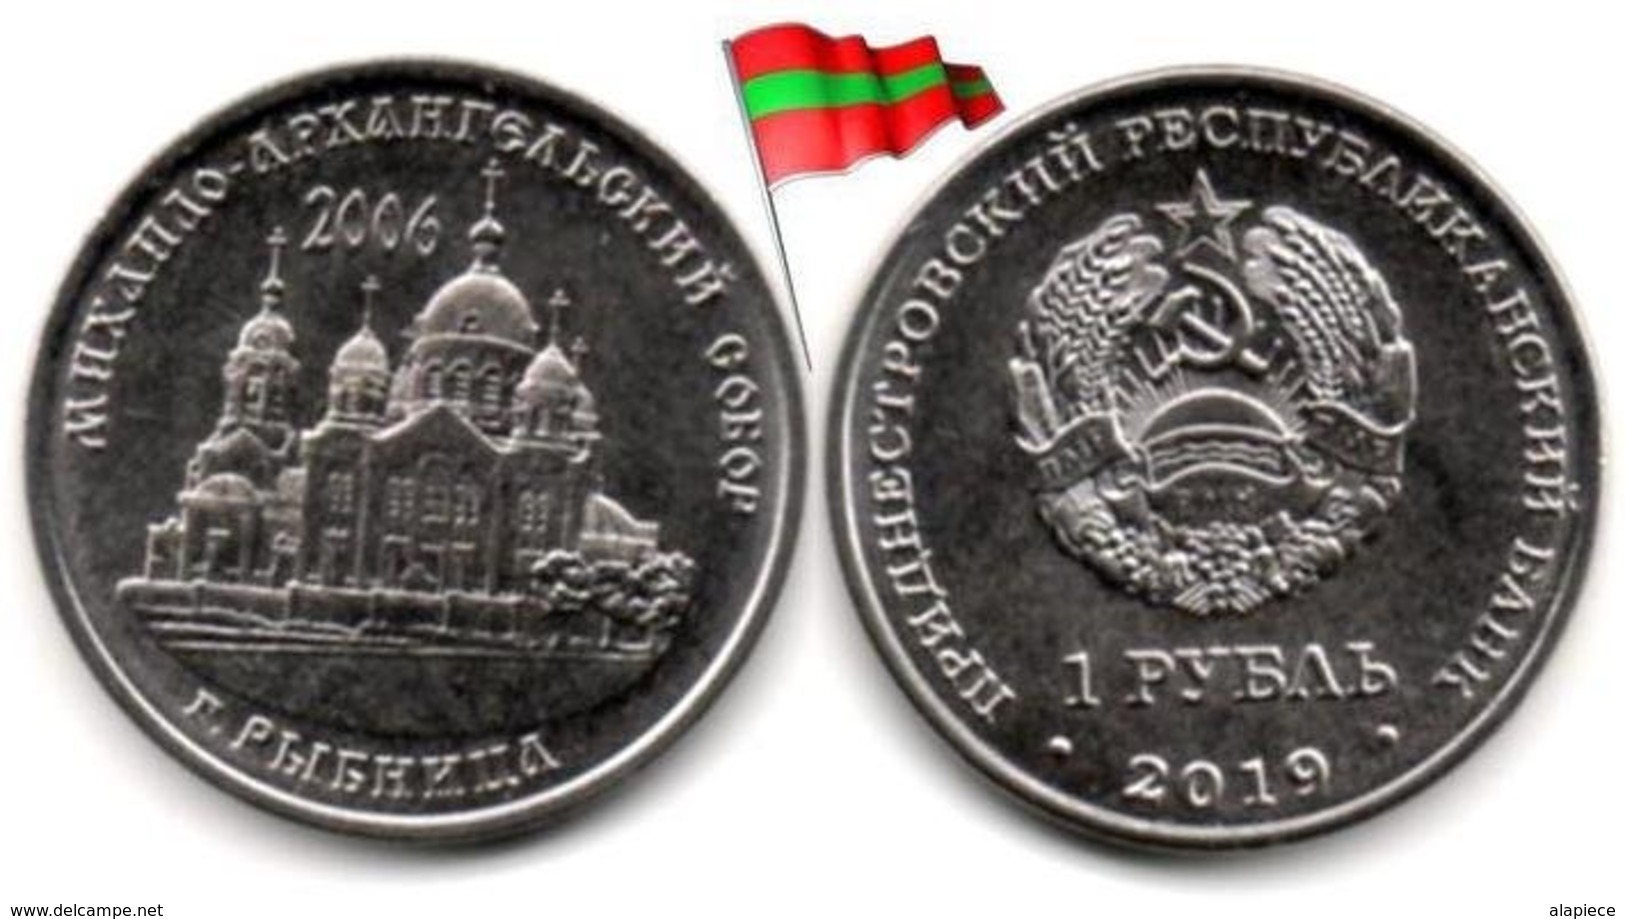 Transnistria - 1 Rouble 2019 (St. Michael The Archangel Cathedral Rybnitsa - 50,000 Ex.) - Moldavia